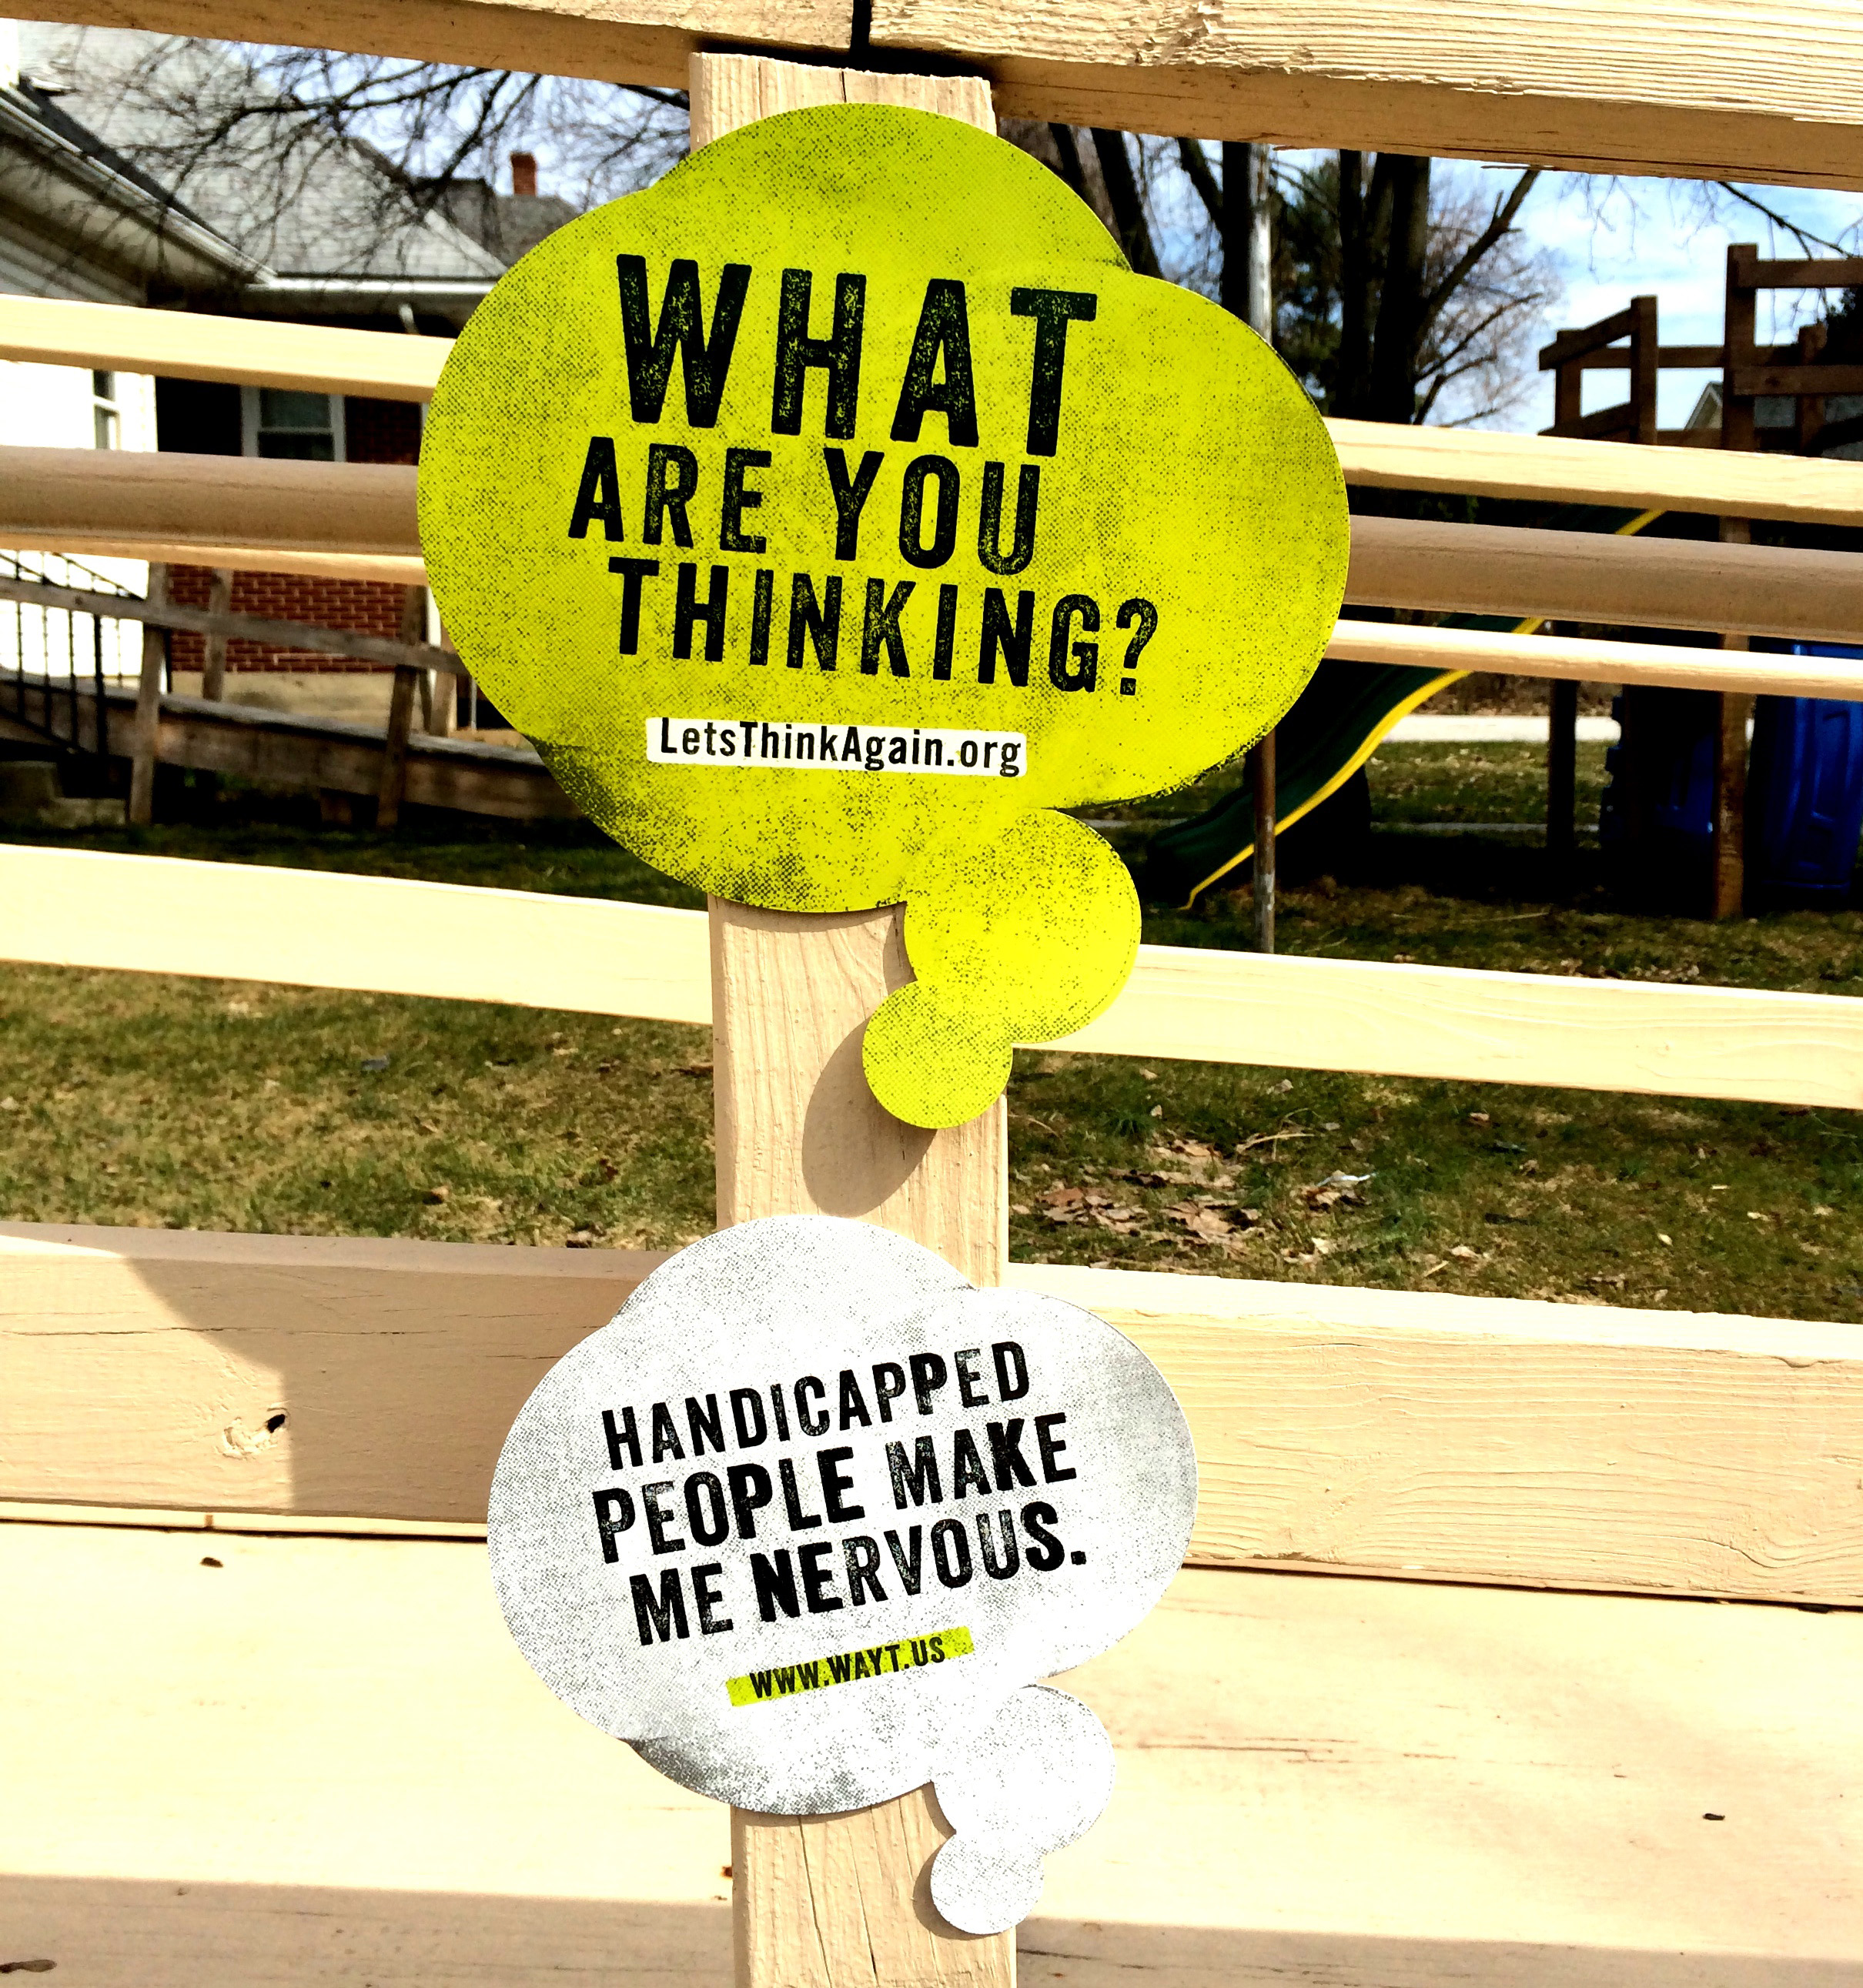 PHOTO: Pennsylvania's "Let's Think Again" campaign aims to destigmatize people with disabilities through provocative signs posted in local communities.
